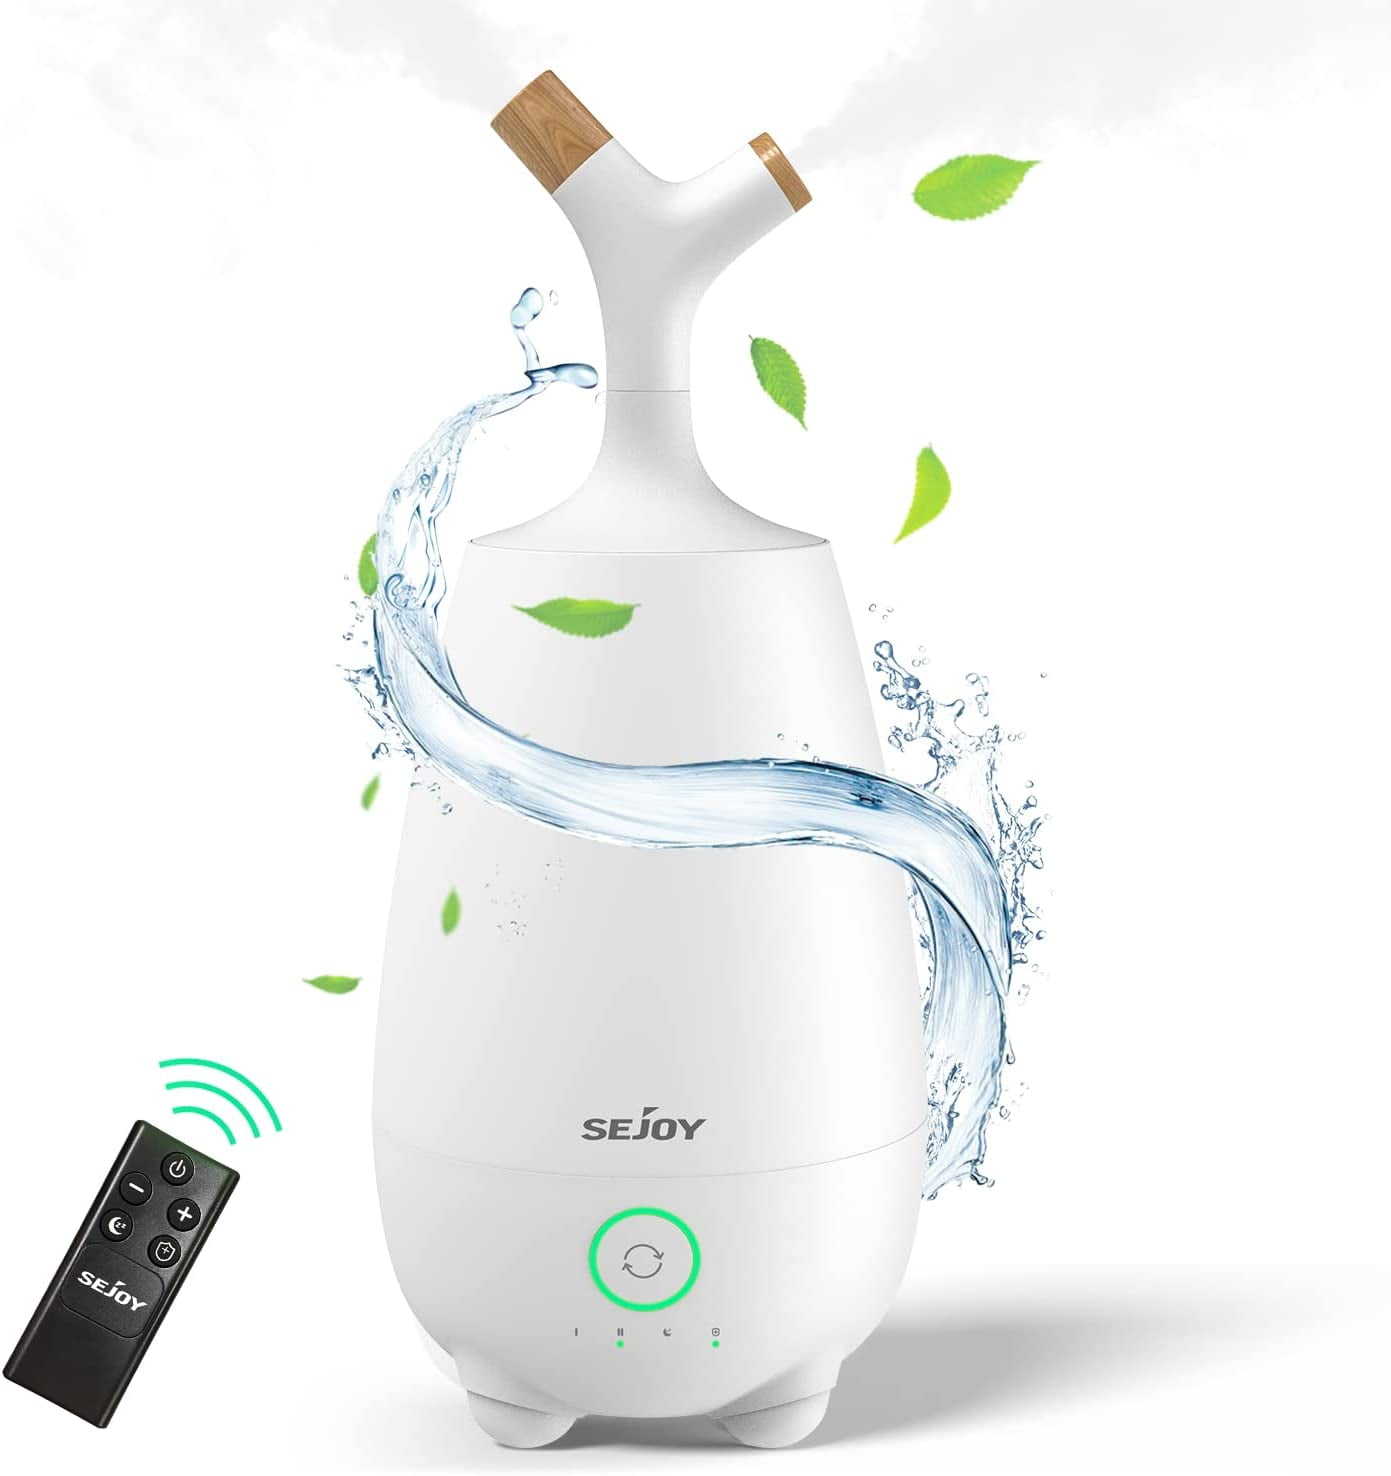 Sejoy Ultrasonic Humidifier for Home, Baby, 5L Large Capacity, Cool Mist, Remote Control, Auto Shut-off, White